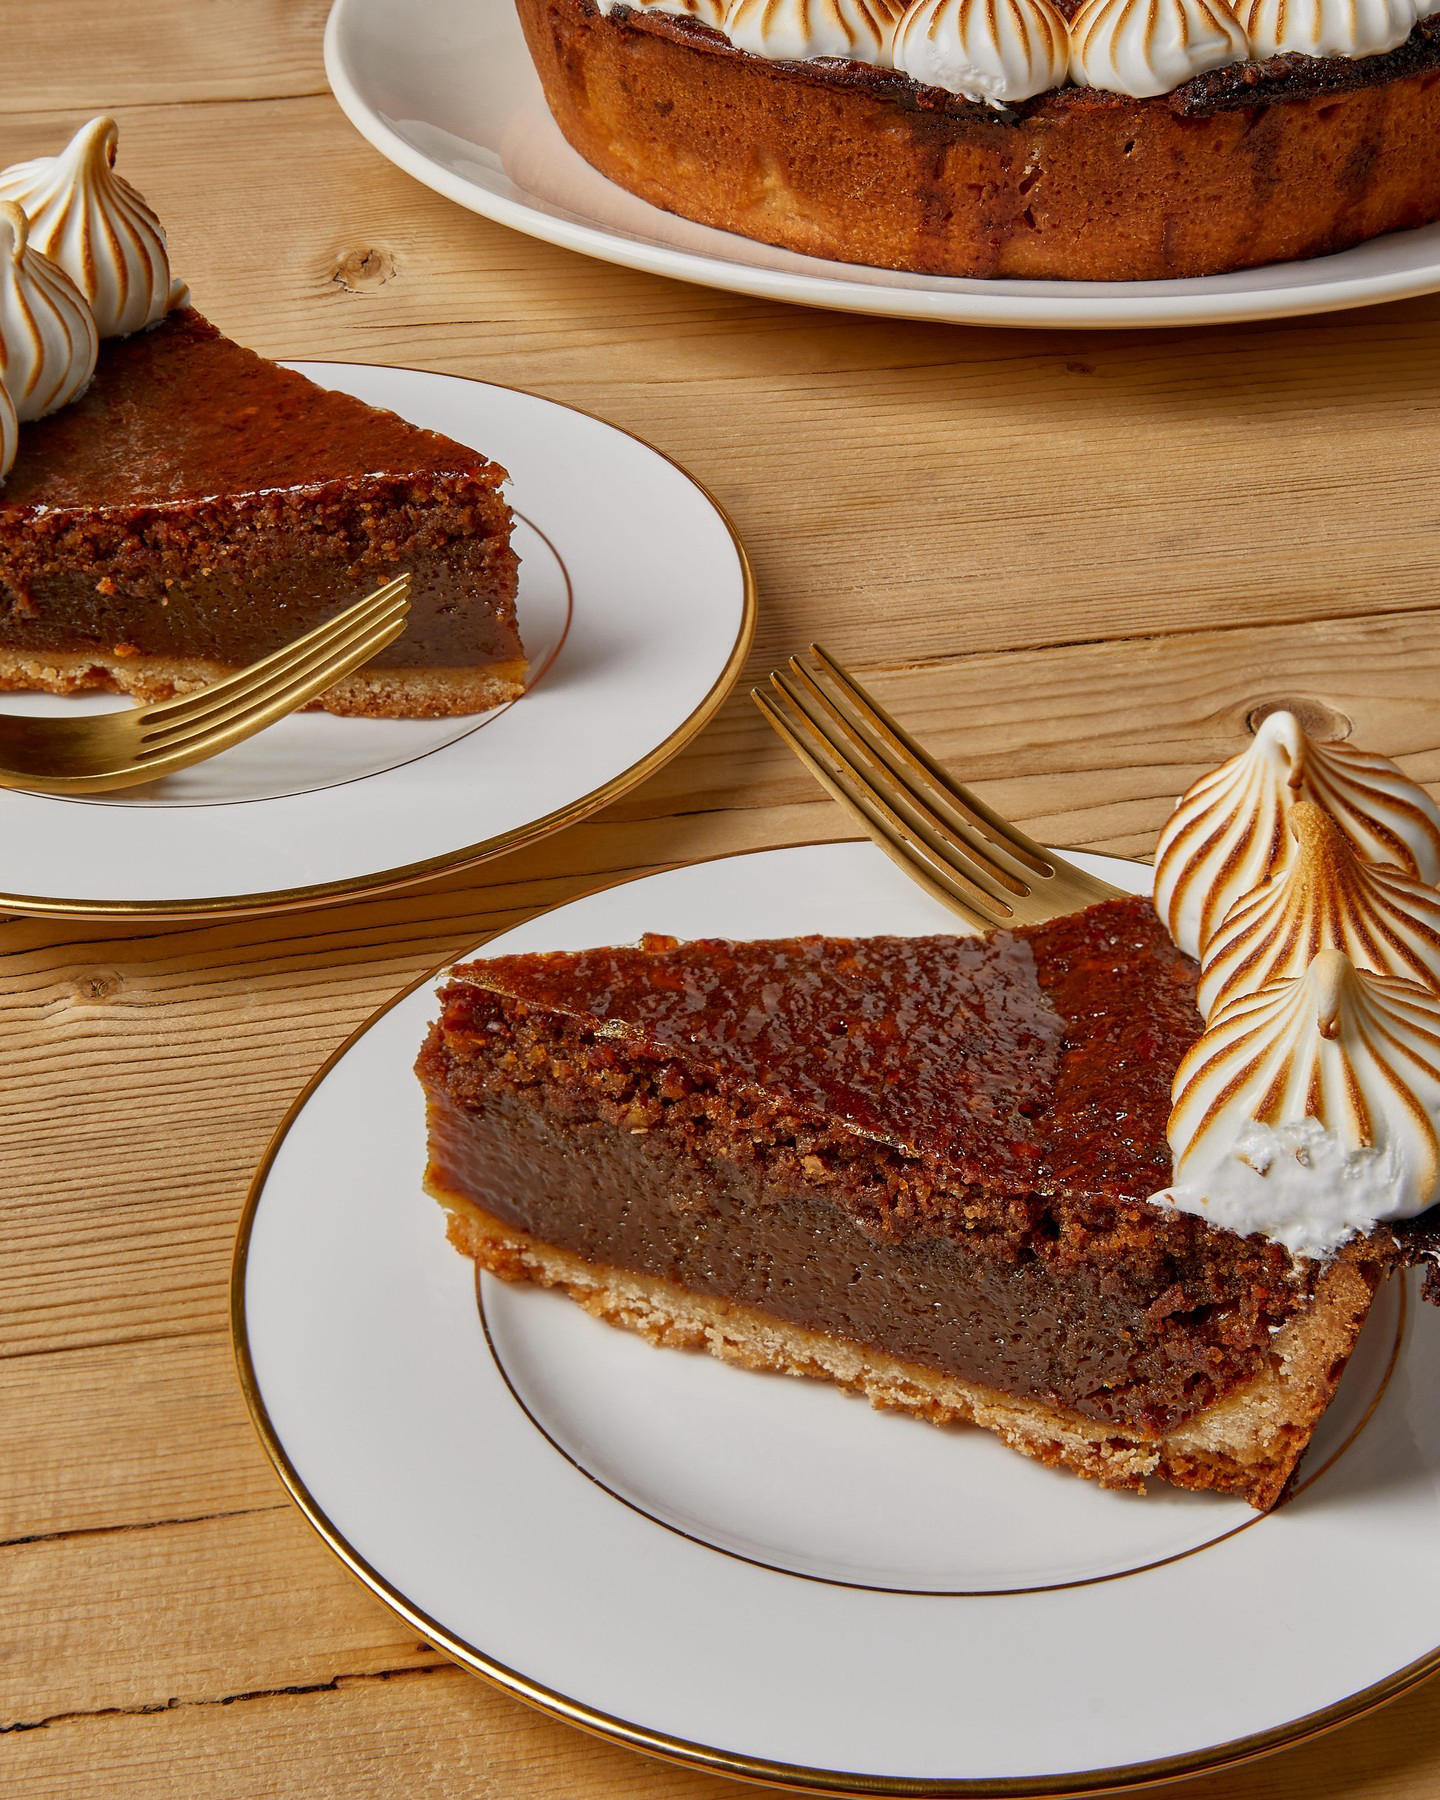 Harrods Food - It’s gourd vibes only this autumn with wickedly sweet pumpkin pie spiced with clove,